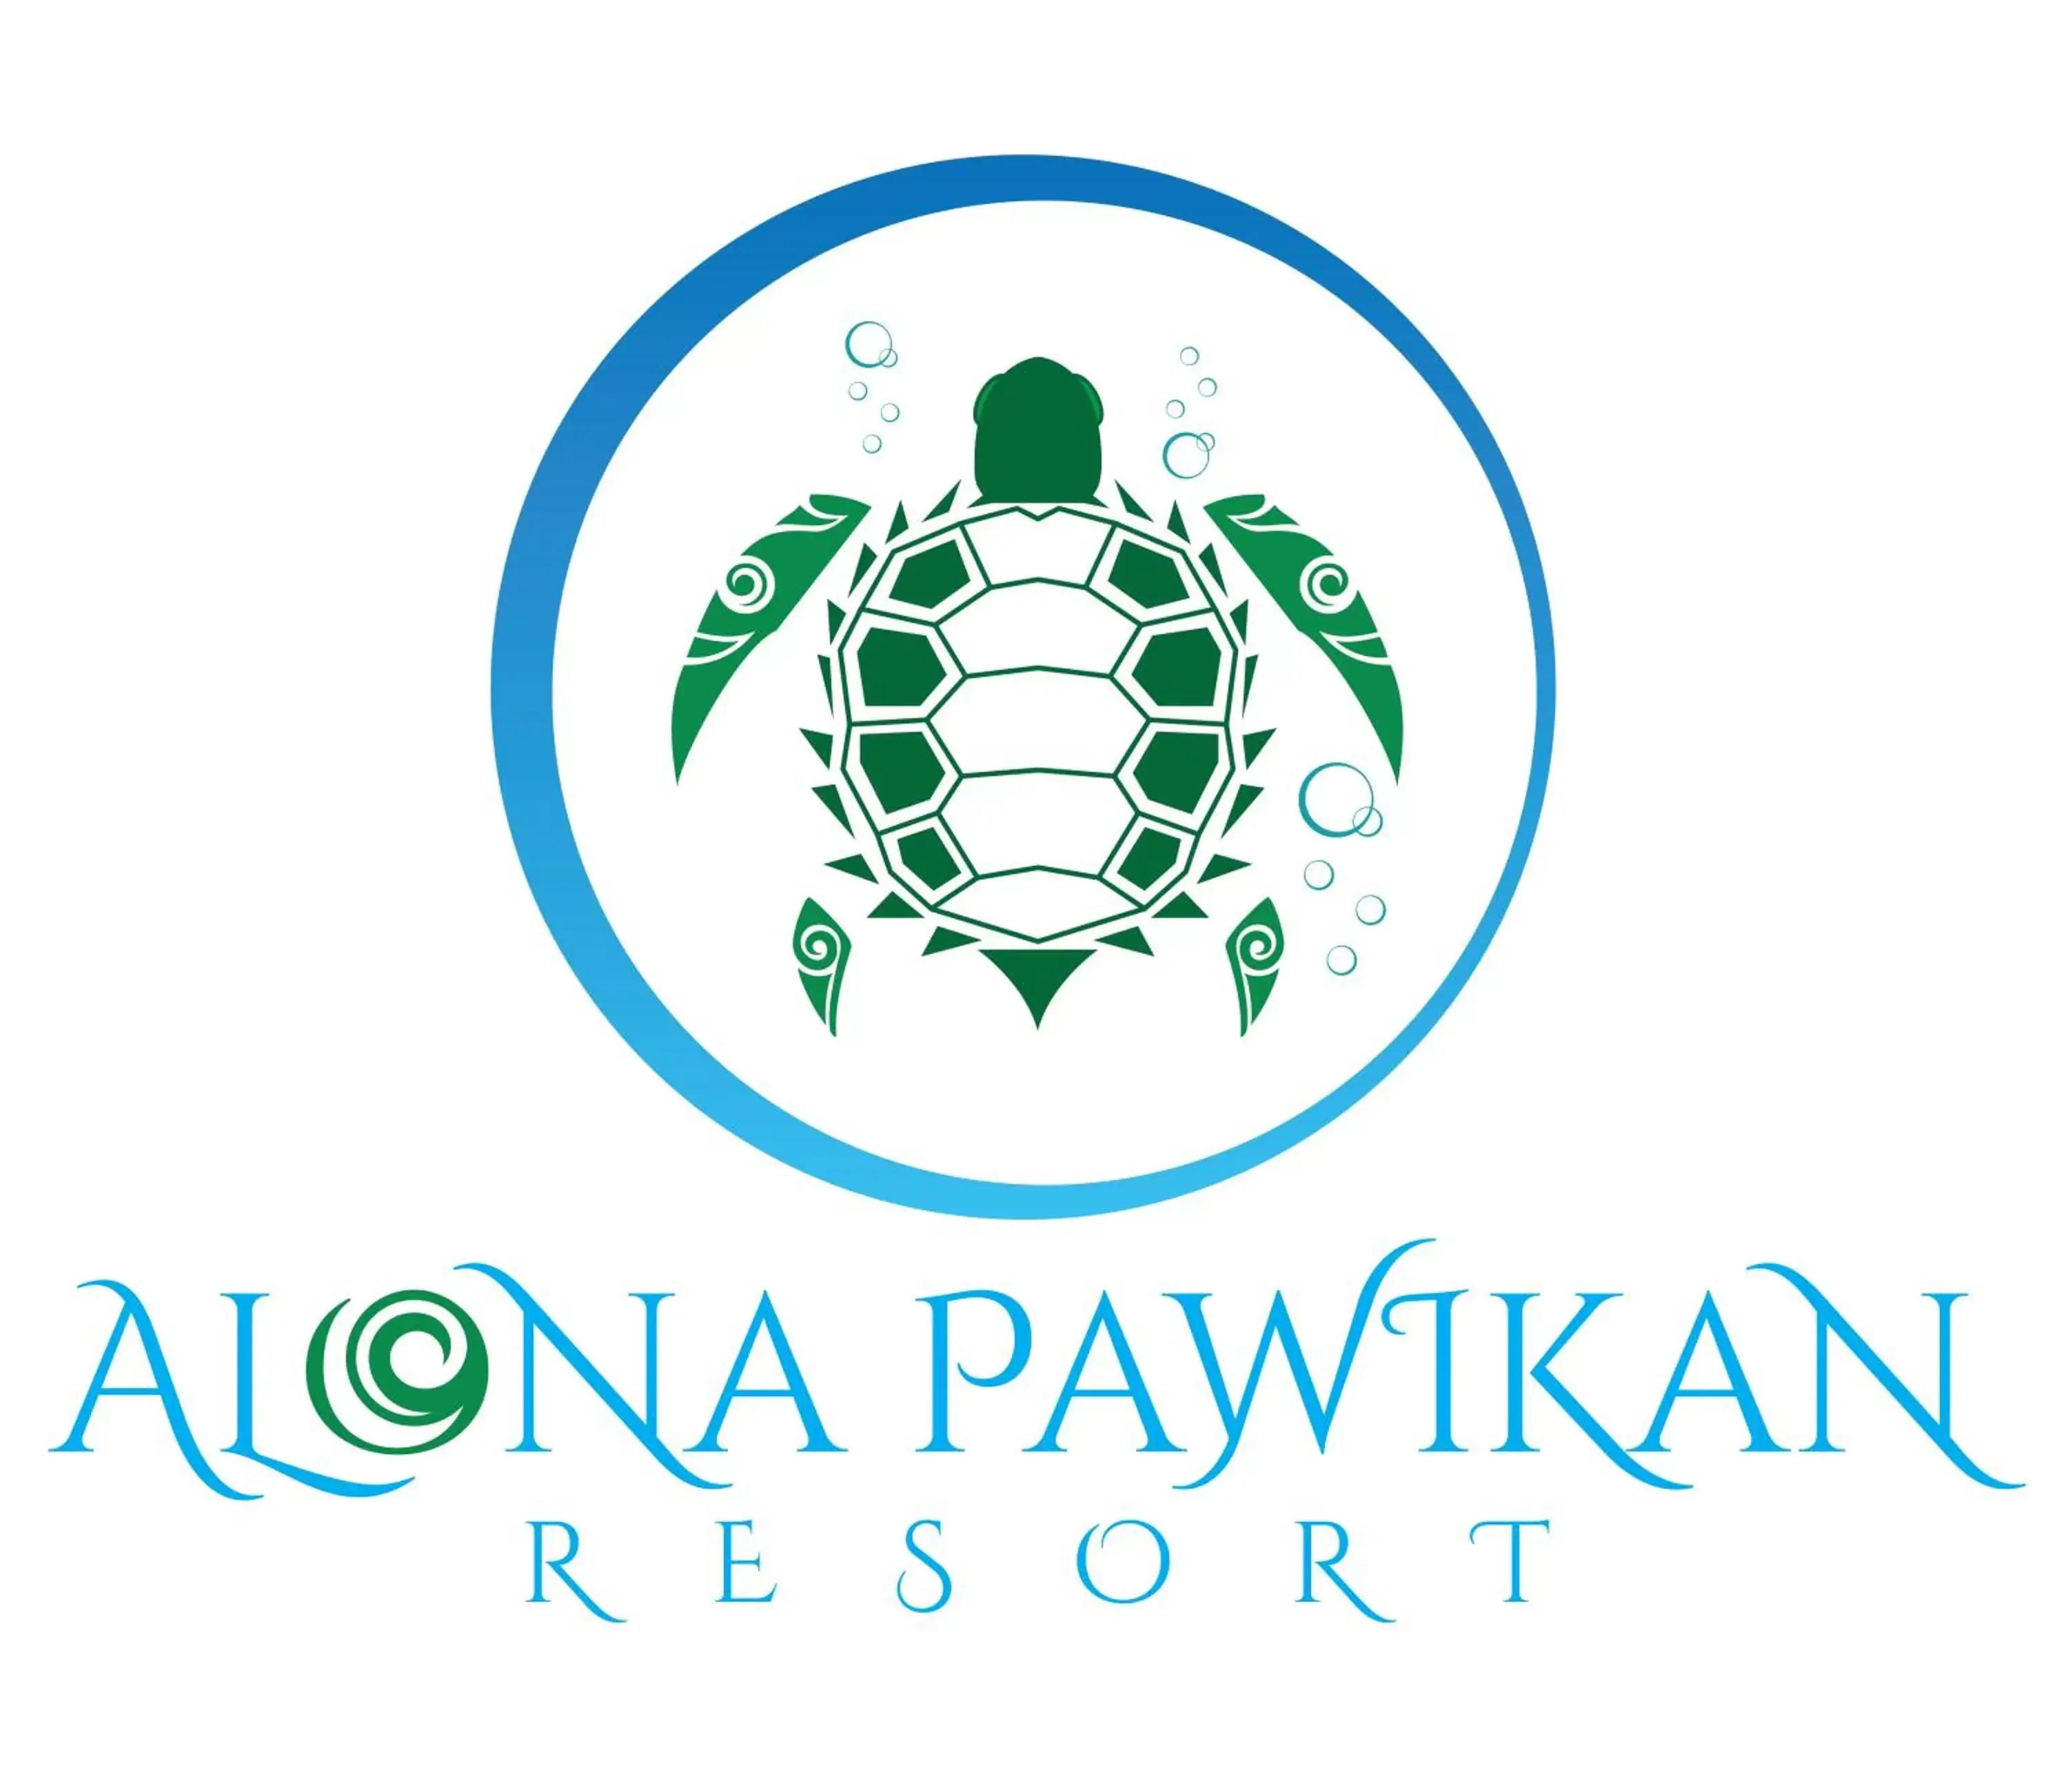 Property logo or sign in Alona Pawikan